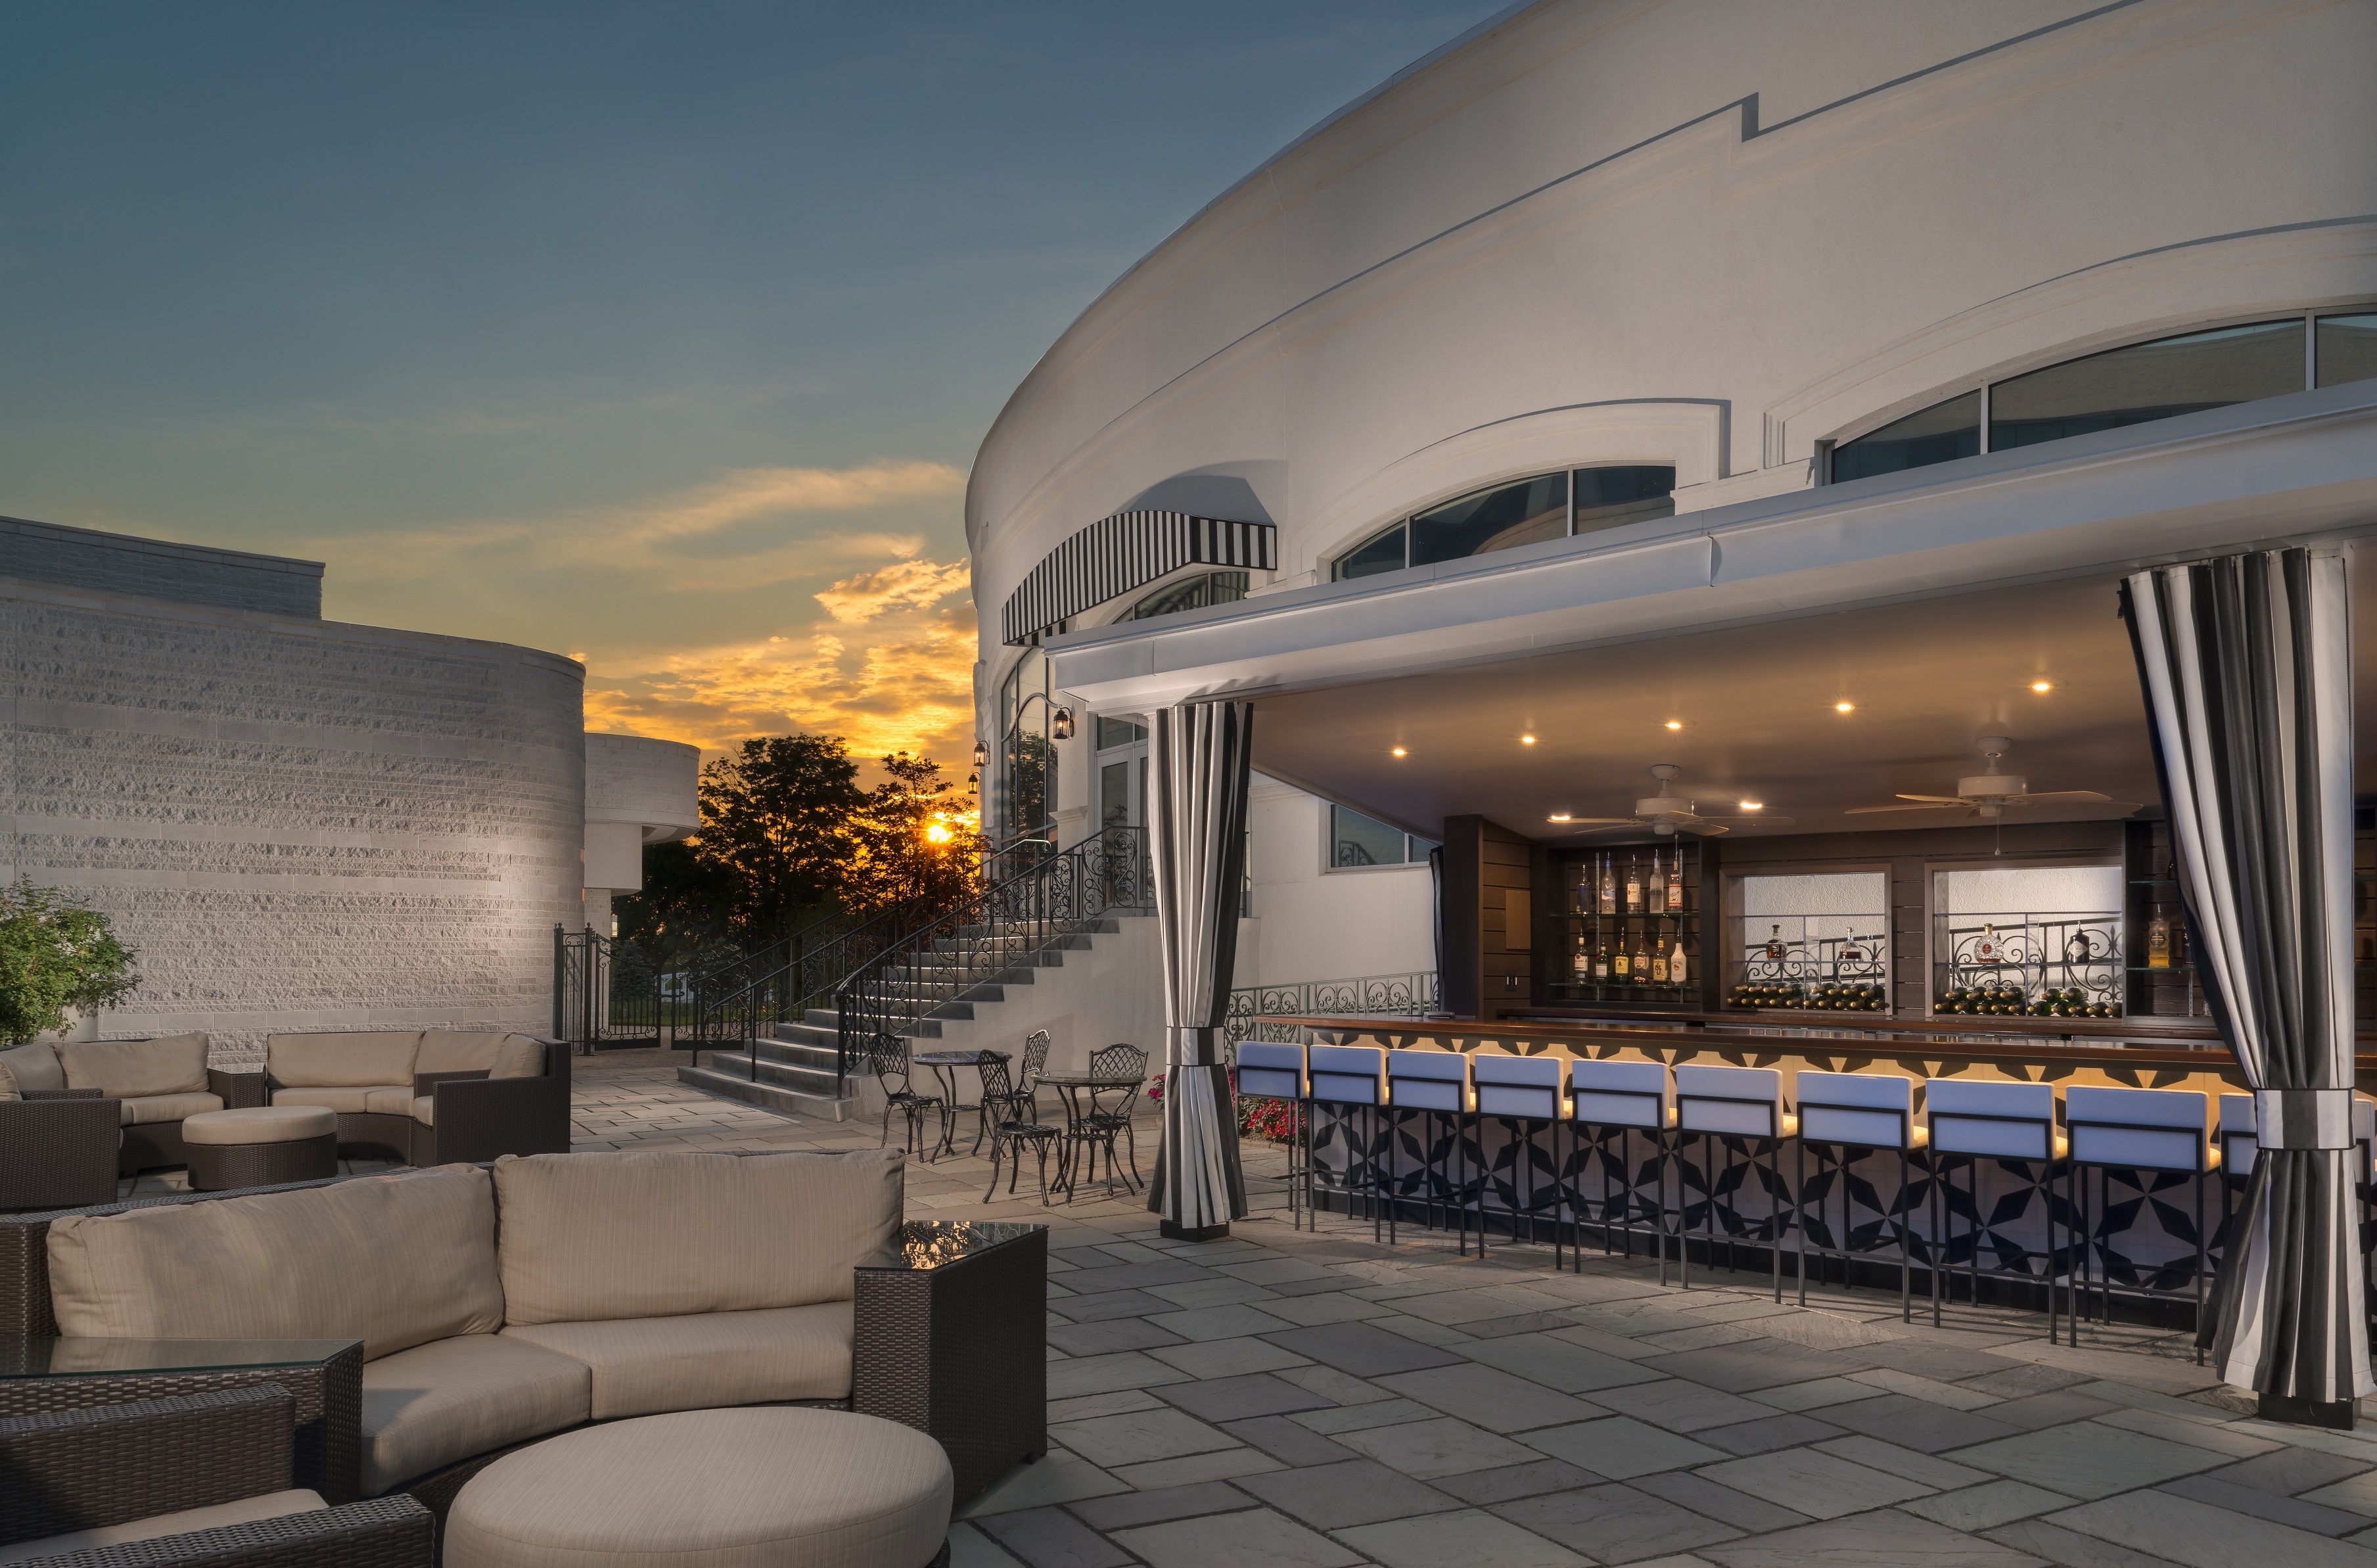 Sun sets on Crescent Courtyard outdoor patio bar and performance space